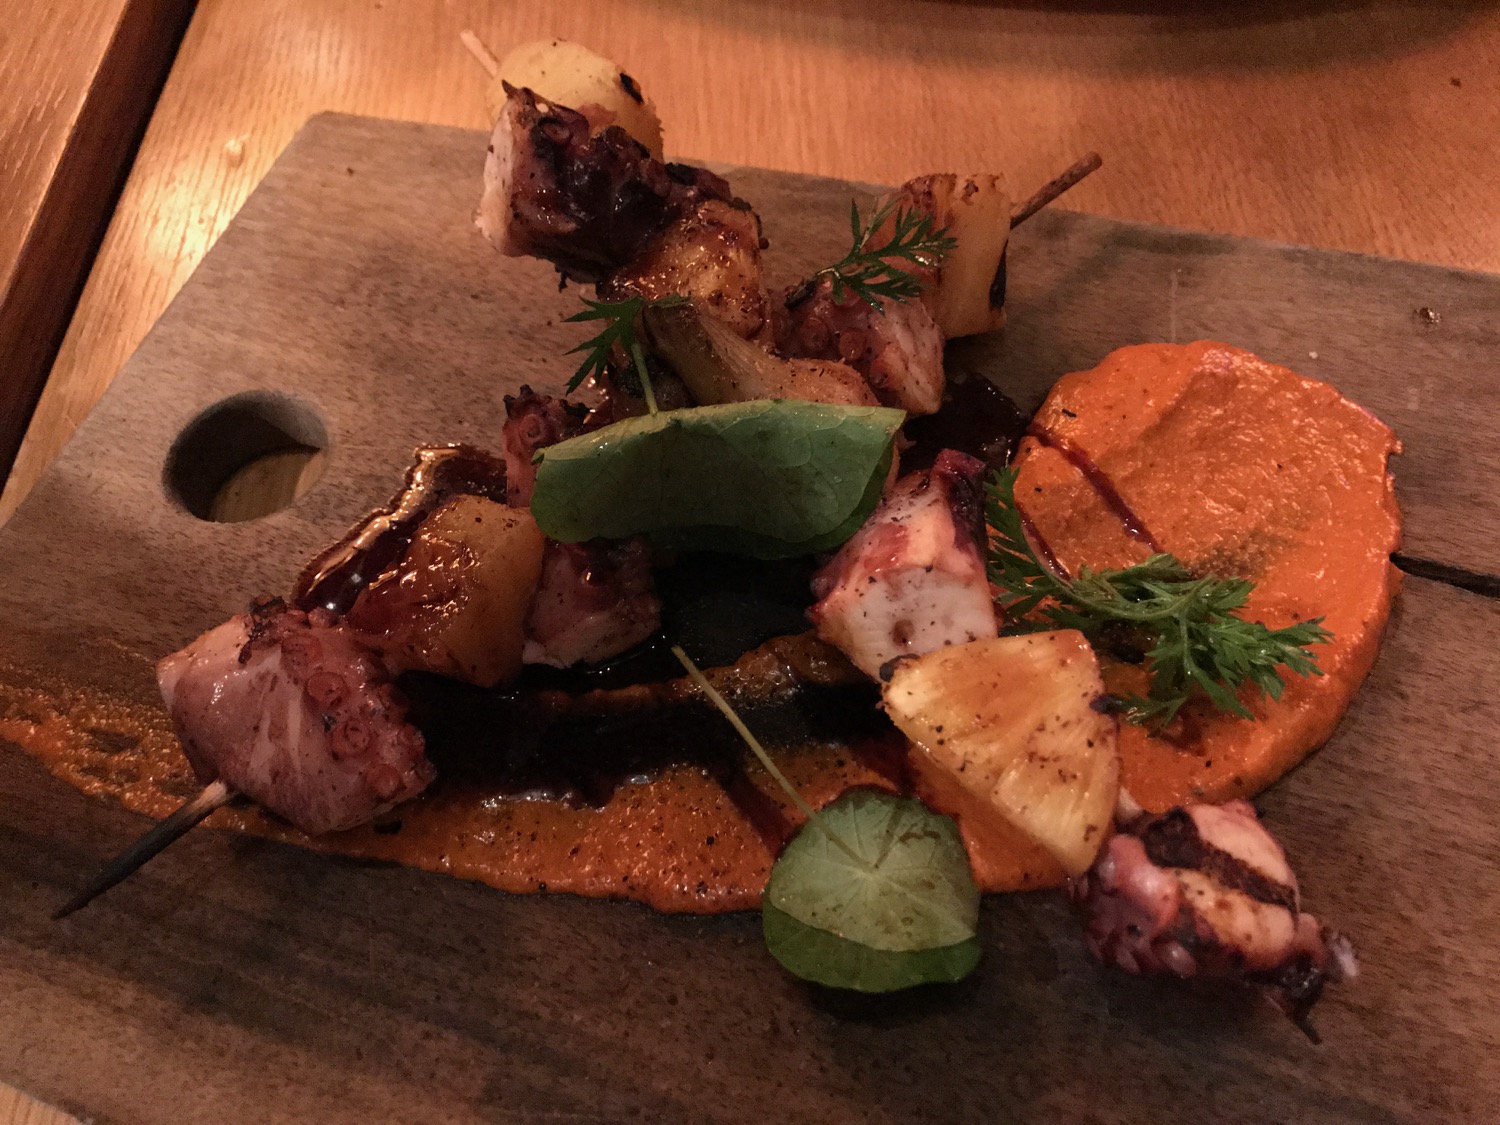 a skewer of meat and vegetables on a wooden board